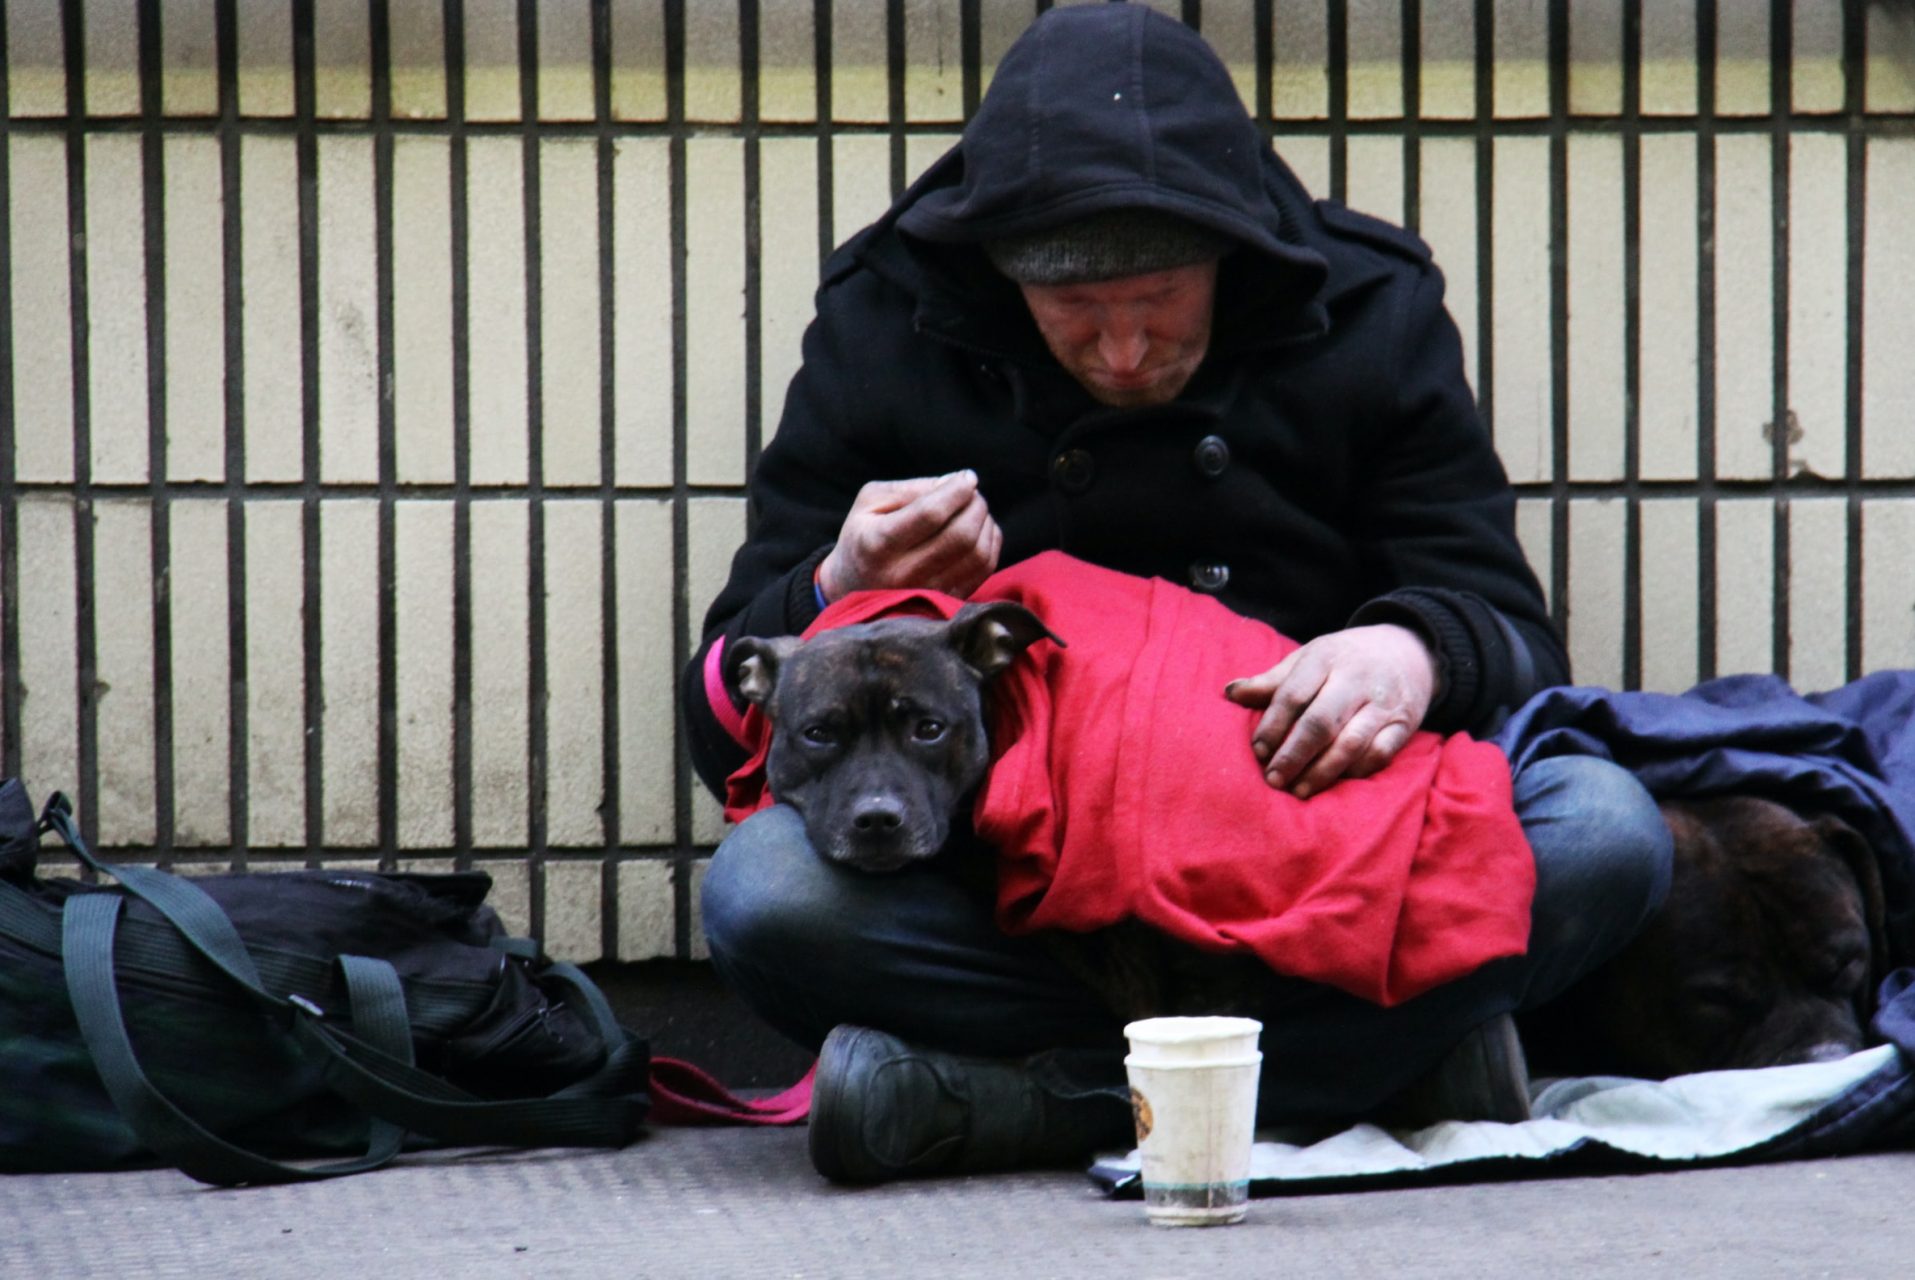 A homeless man, with his dog, sitting on a pavement